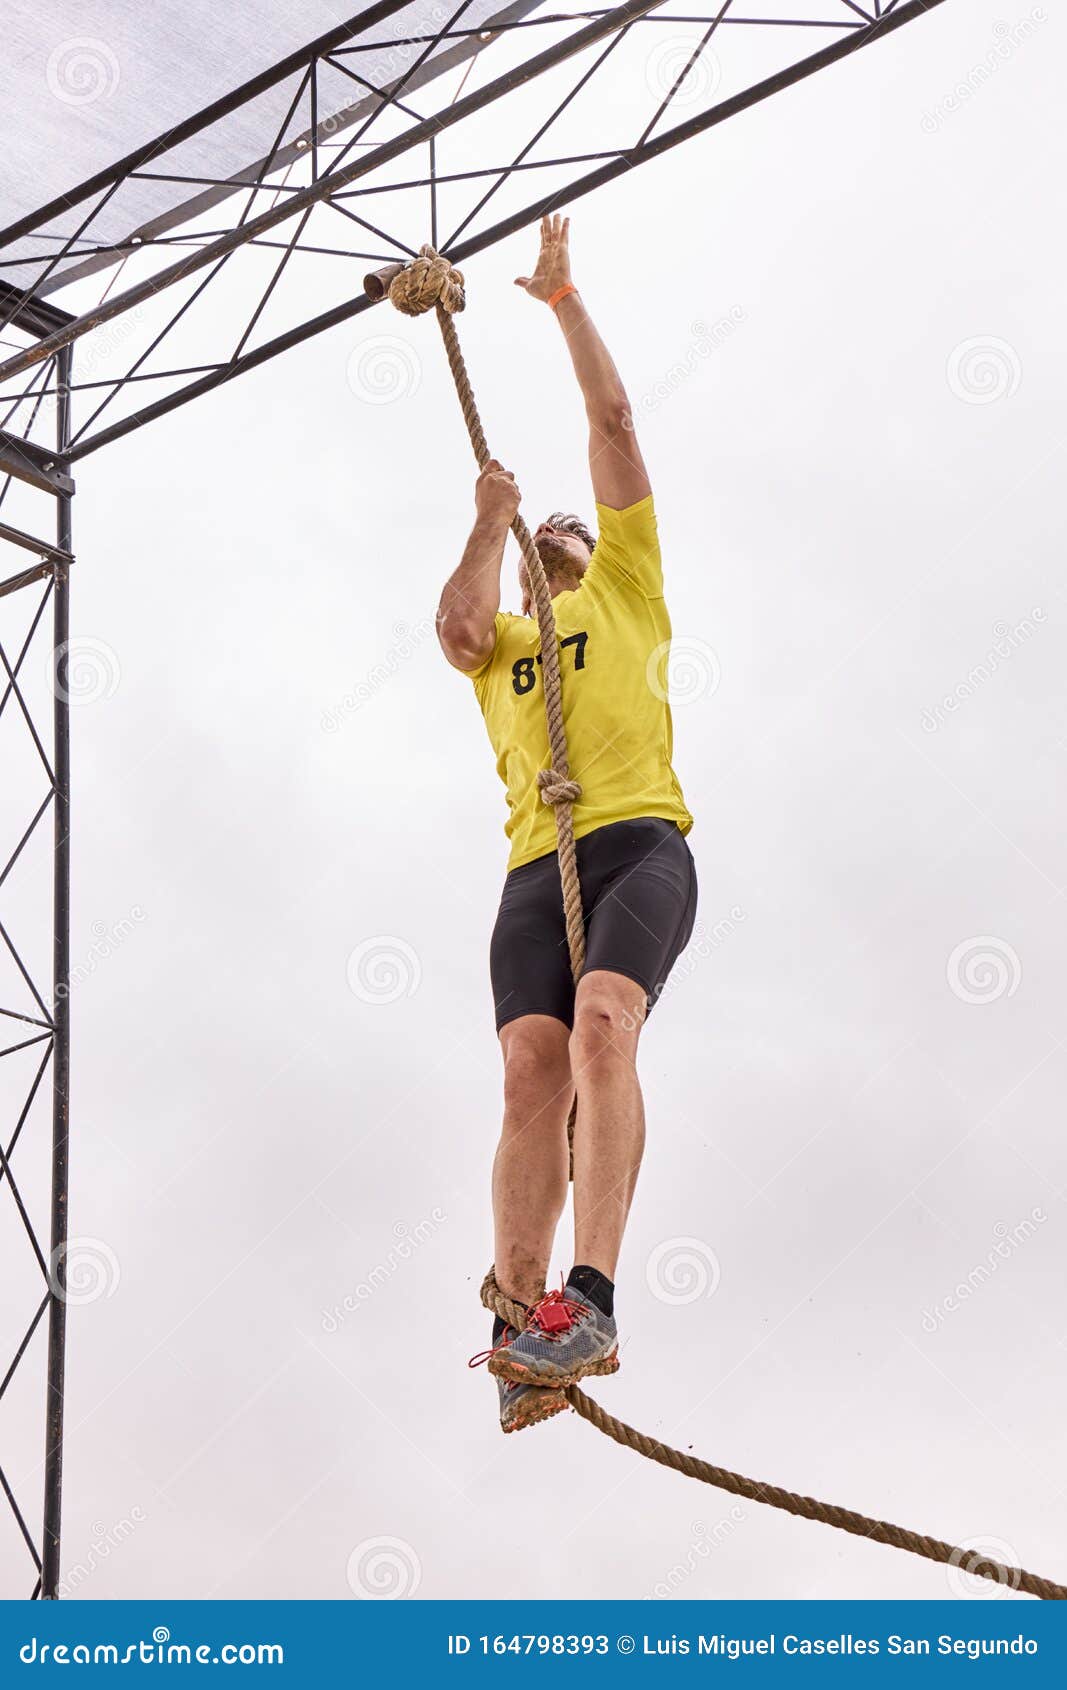 https://thumbs.dreamstime.com/z/young-man-climbing-rope-knots-spartan-race-extreme-sport-concept-young-man-climbing-rope-knots-spartan-race-164798393.jpg